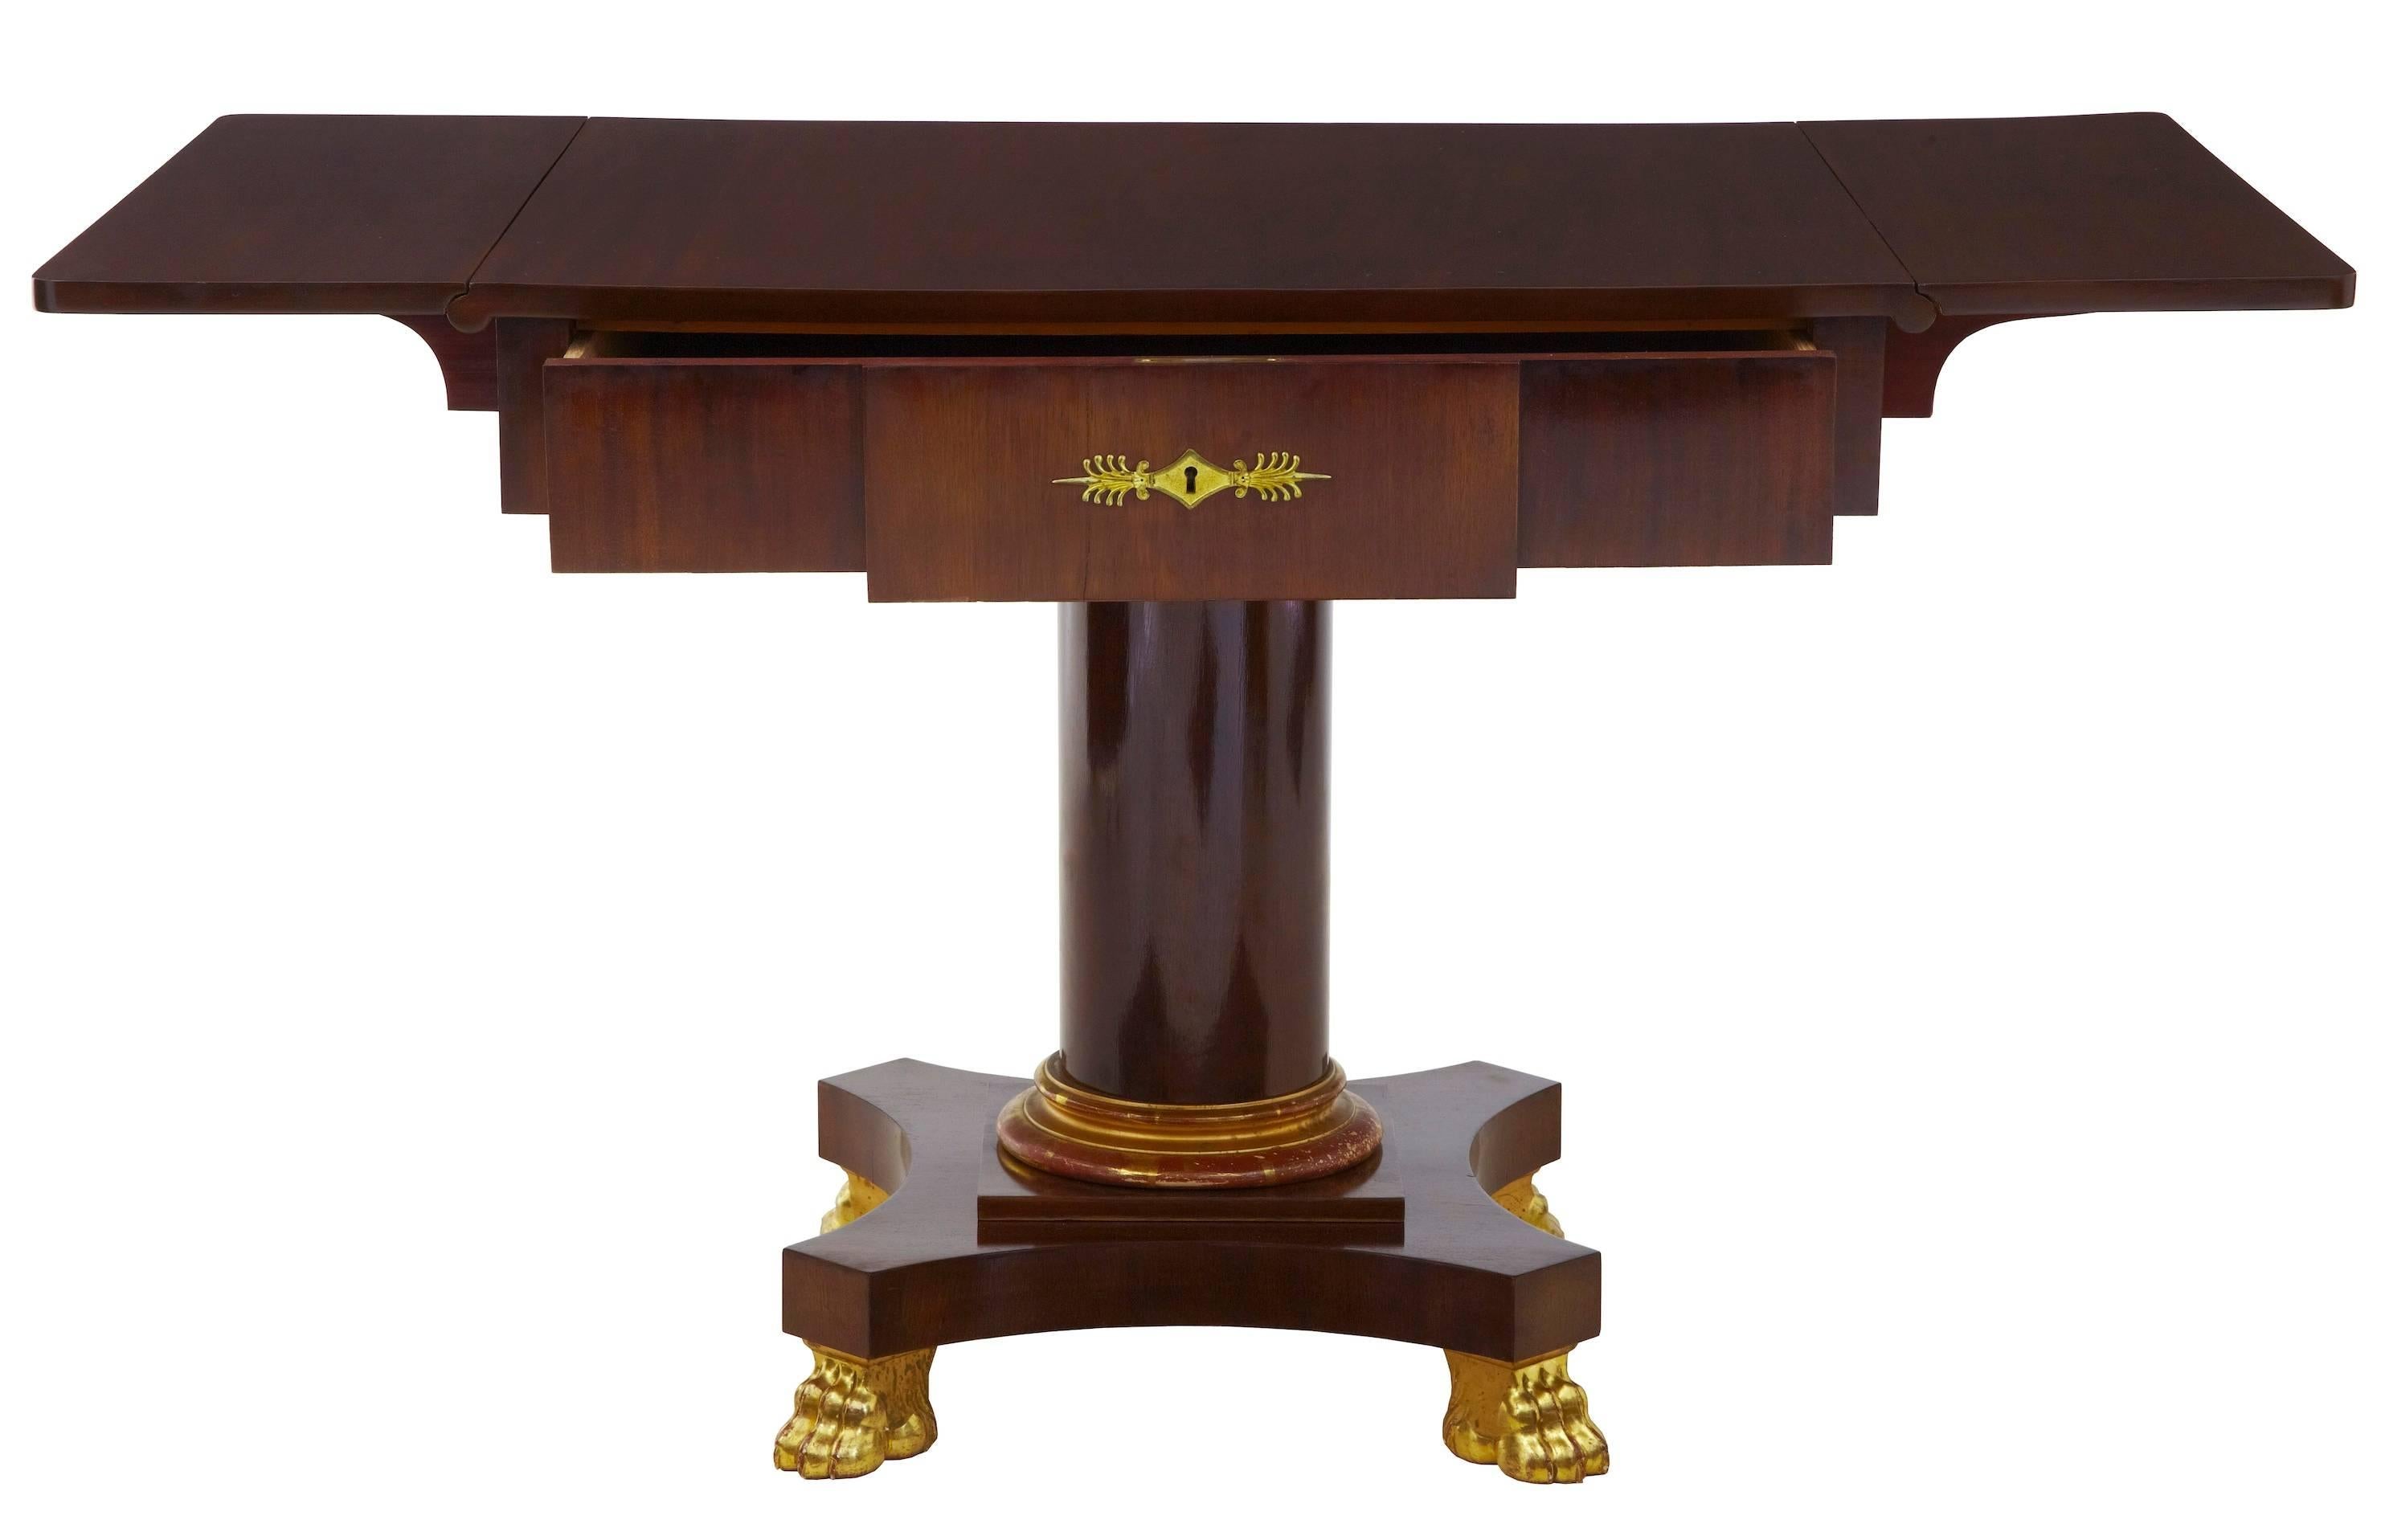 Good quality mahogany sofa table, strong in Empire design, circa 1910.
Single drawer to the front.
Barrel stem, standing on four gilt carved paw feet.
No key.
Measures:
Height: 30 1/4